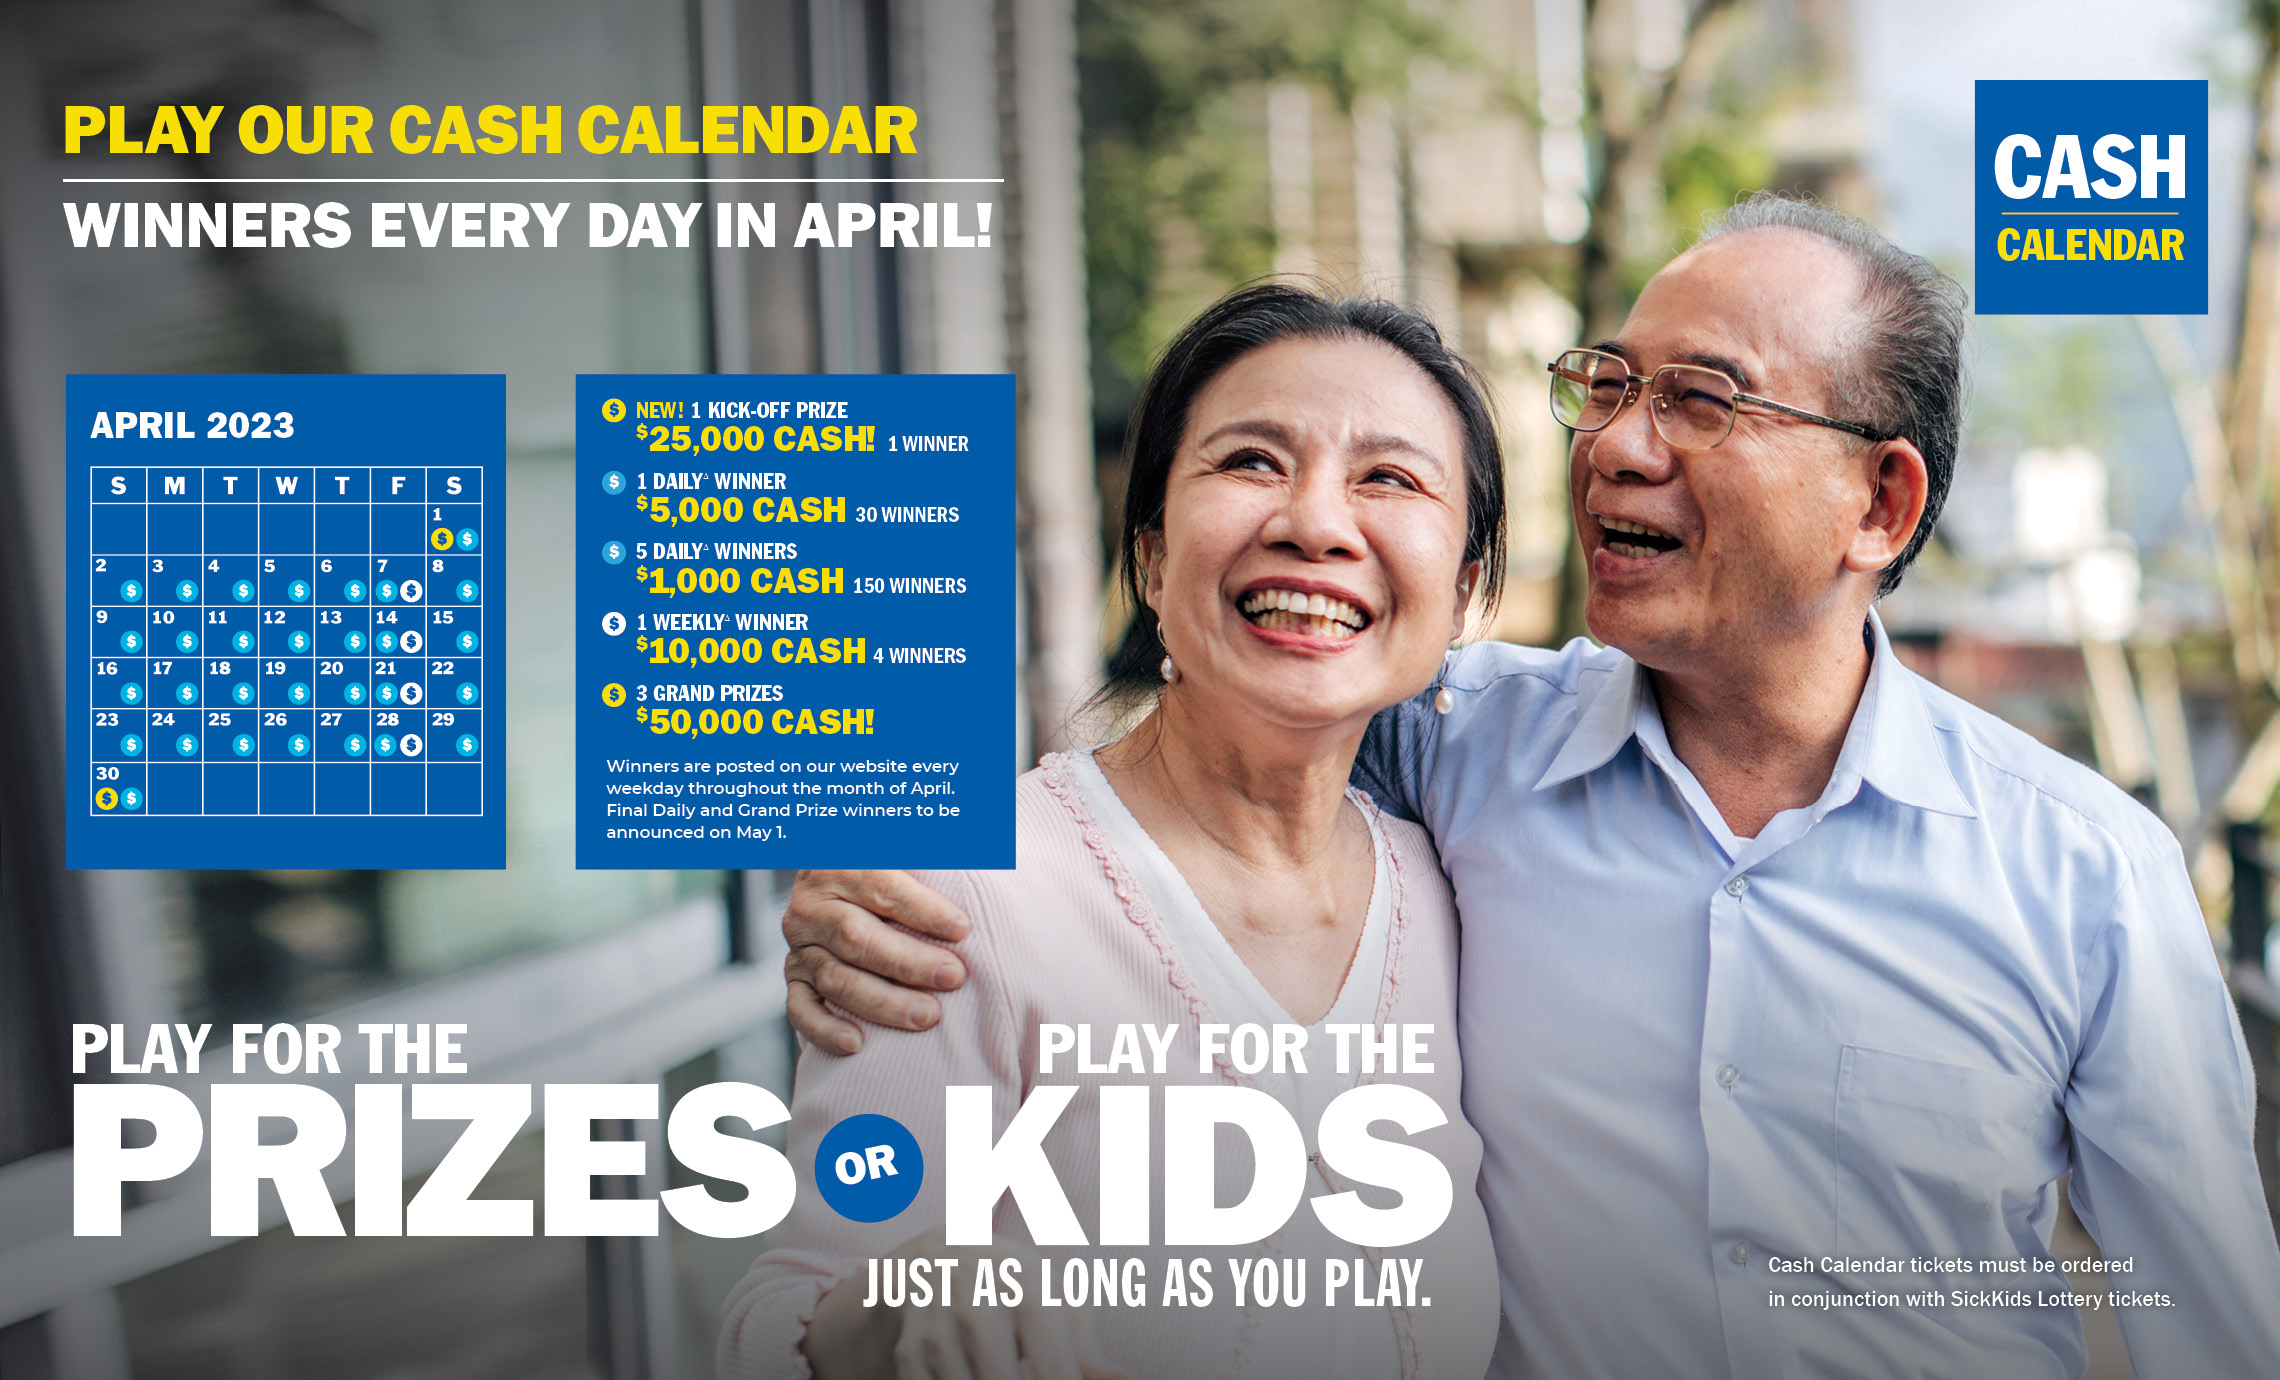 PLAY OUR CASH CALENDAR - WINNERS EVERY DAY IN APRILI